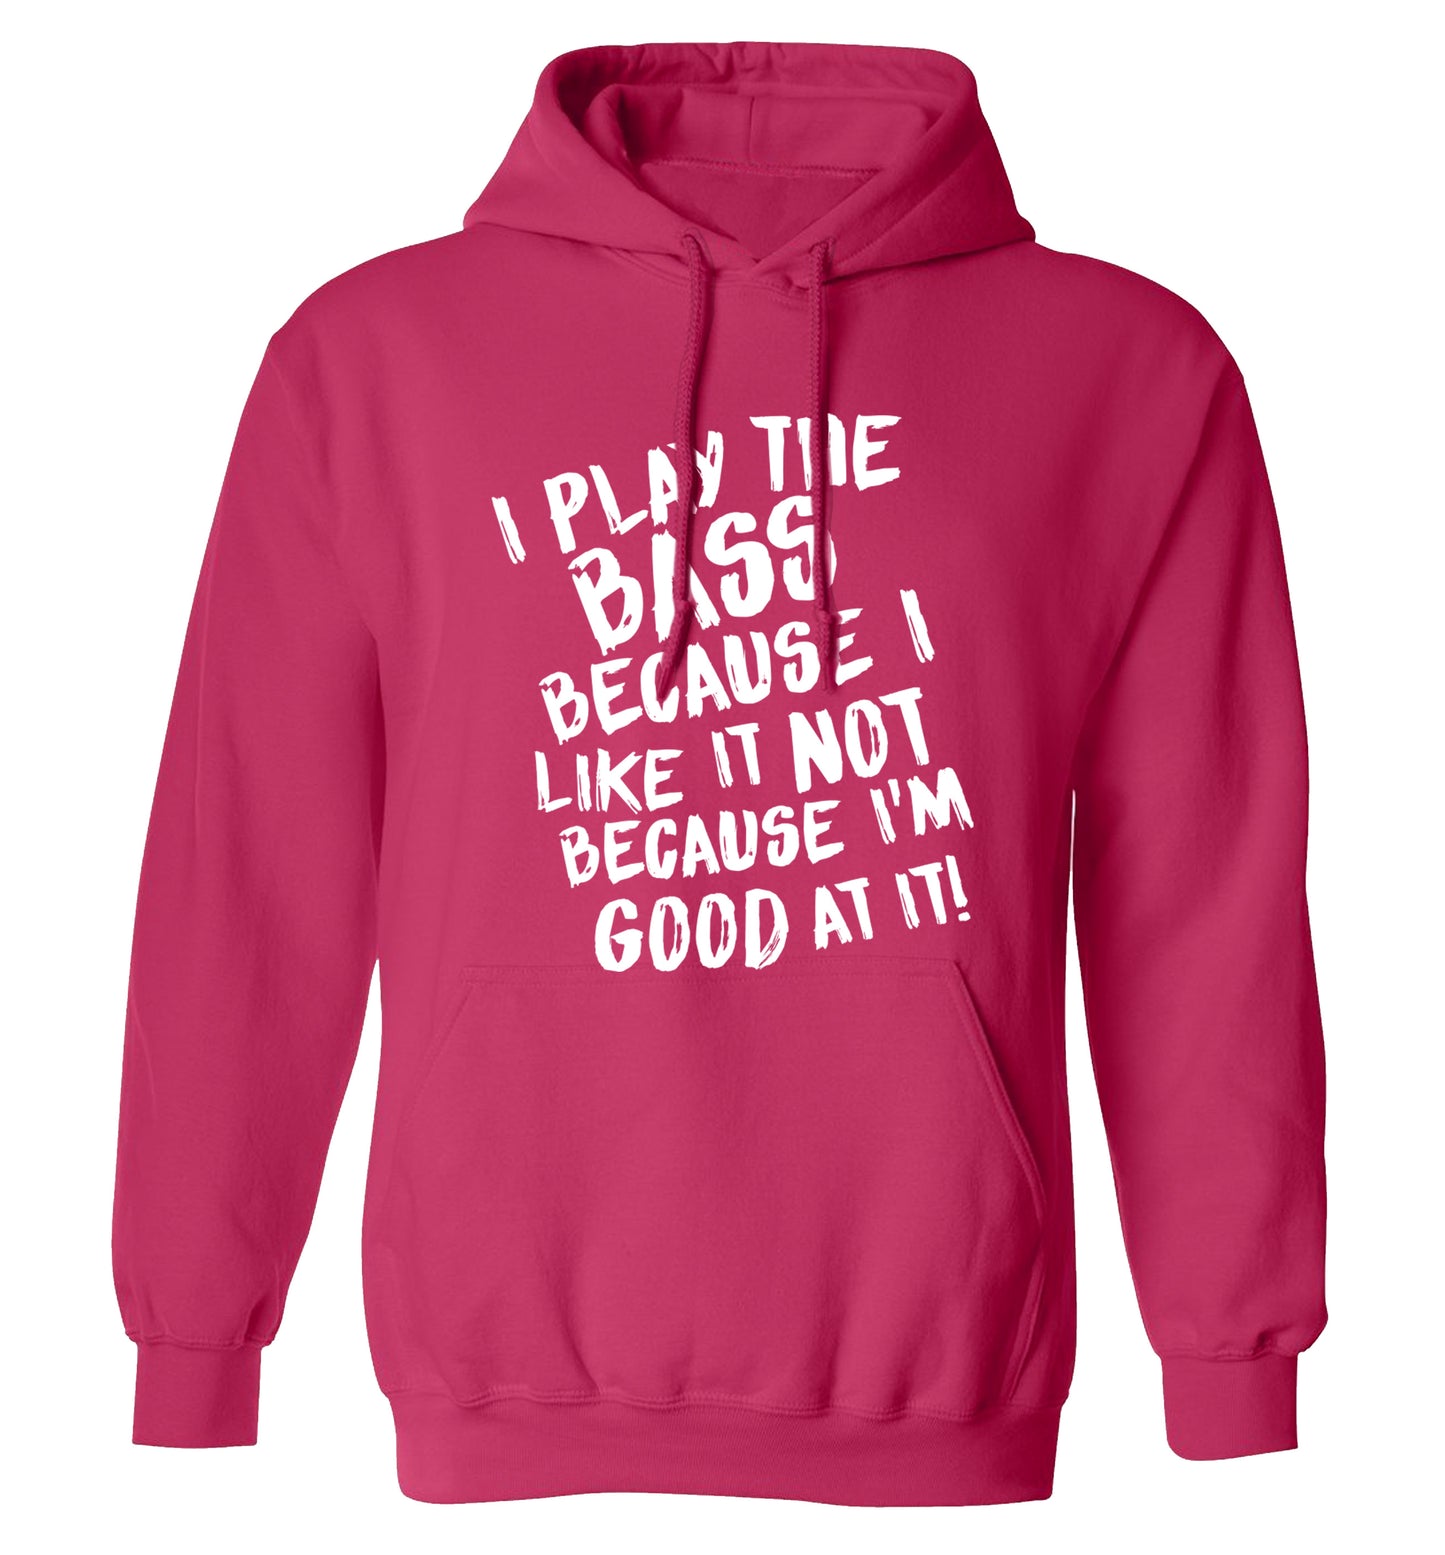 I play the bass because I like it not because I'm good at it adults unisex pink hoodie 2XL